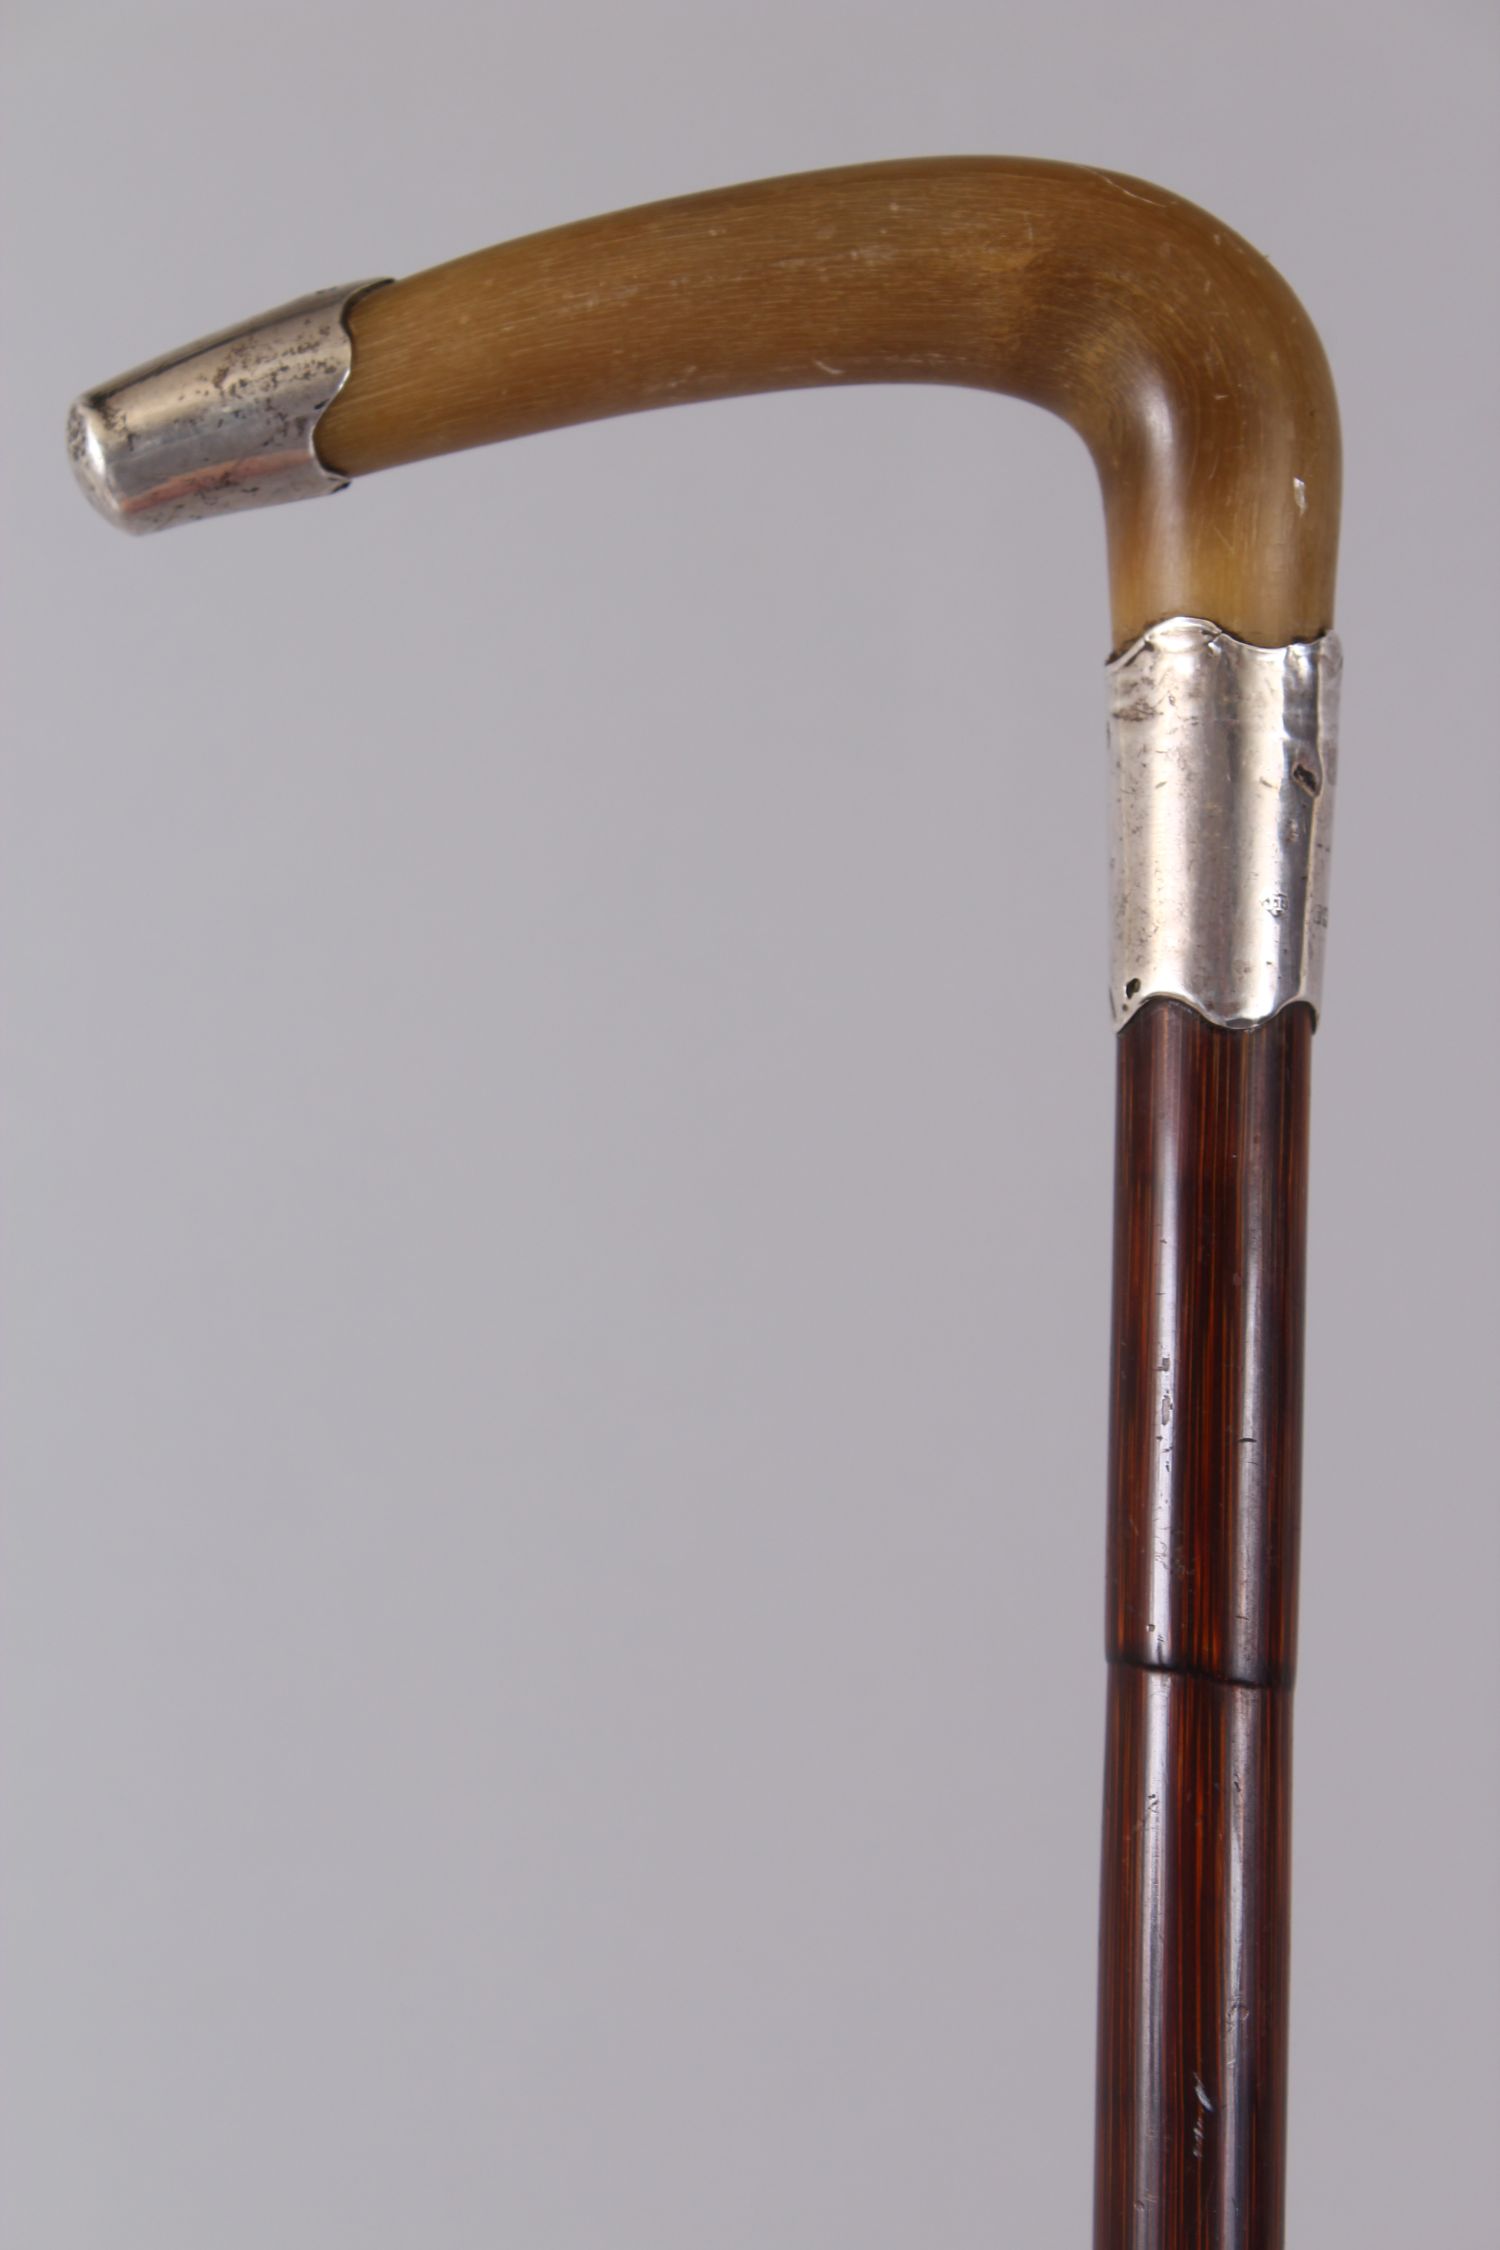 A RHINO HANDLED CANE, carved with a curving handle, silver tip and silver band. 84cm long. - Image 2 of 4